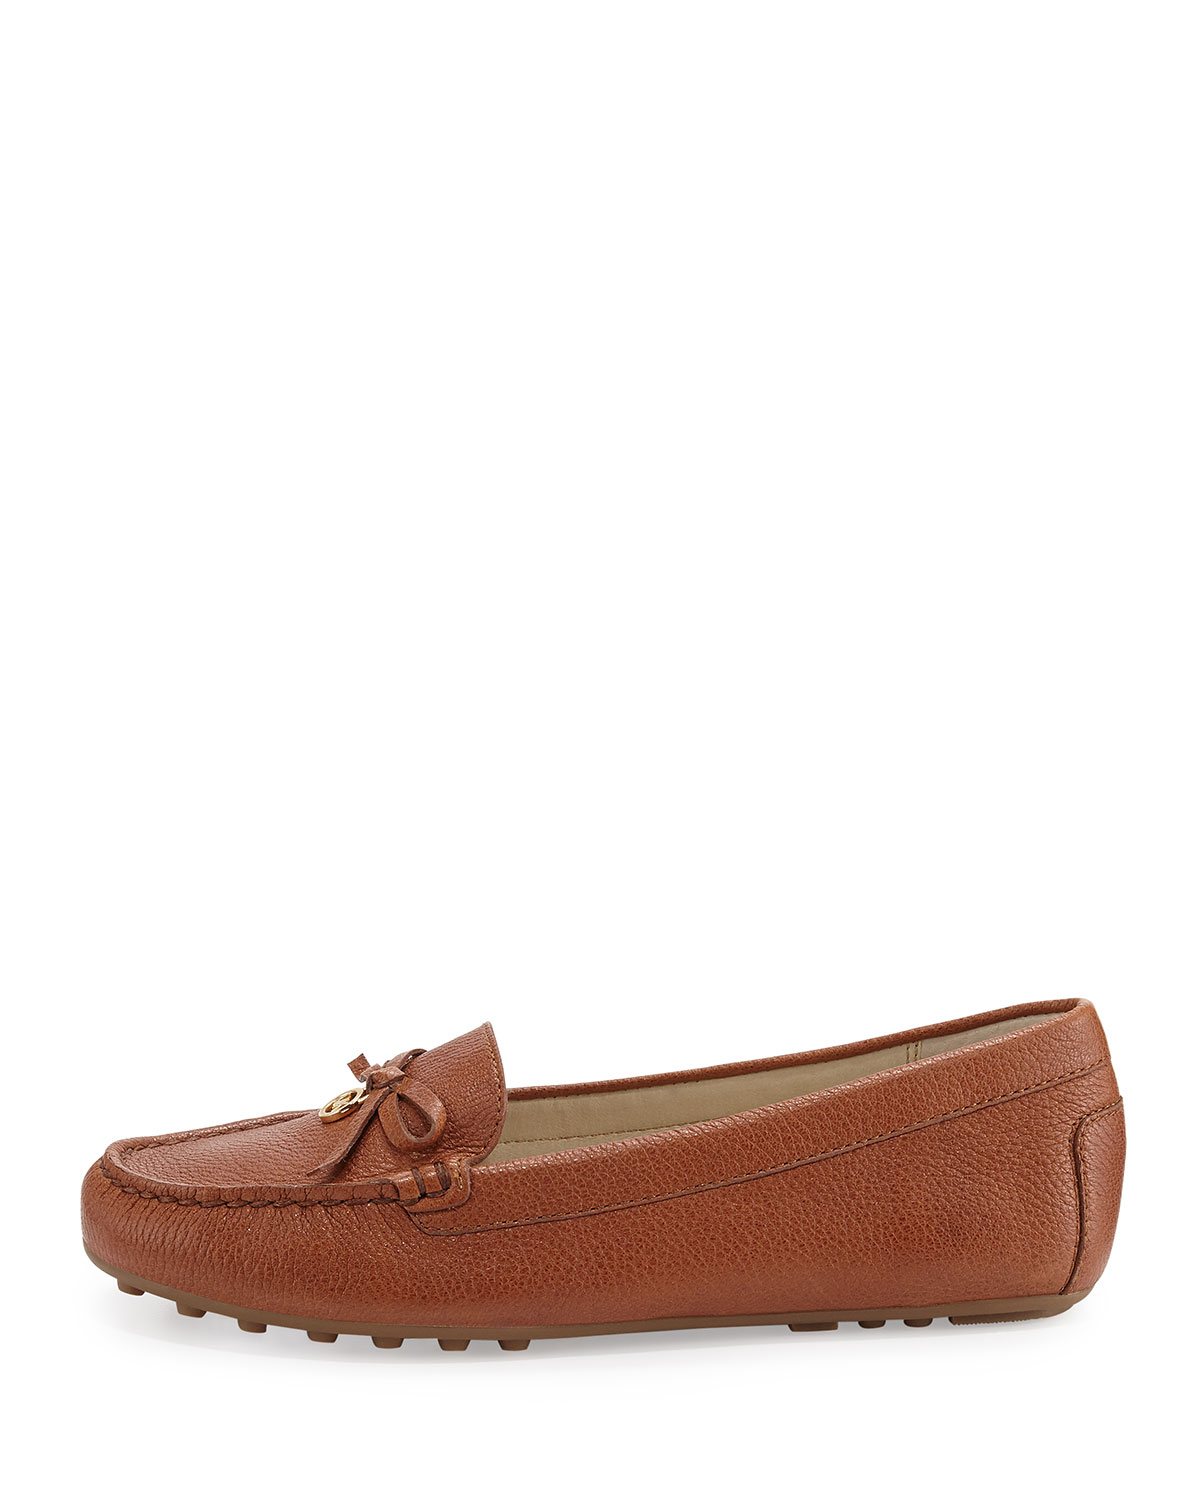 Lyst - Michael Michael Kors Everett Leather Moccasins in Brown